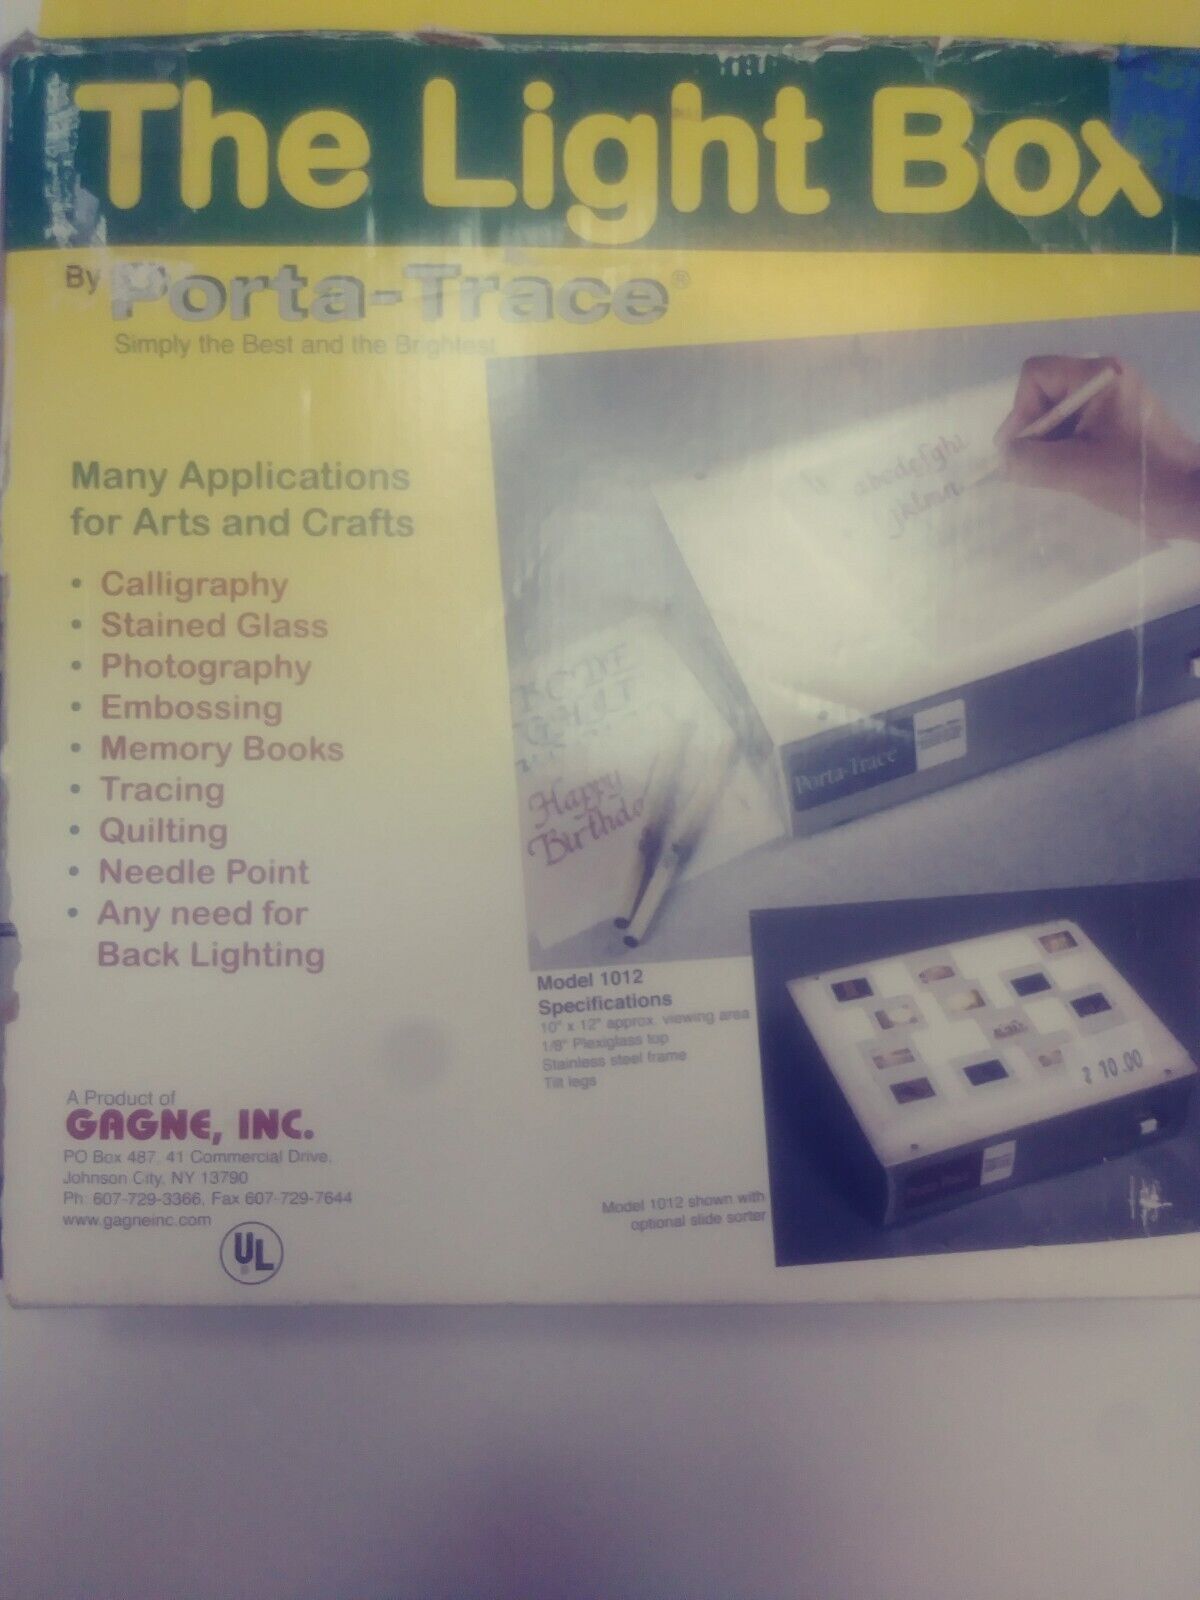 Gagne Inc. Porta-trace The Light Box Model No. 1012 With 10" X 12" Viewing Area